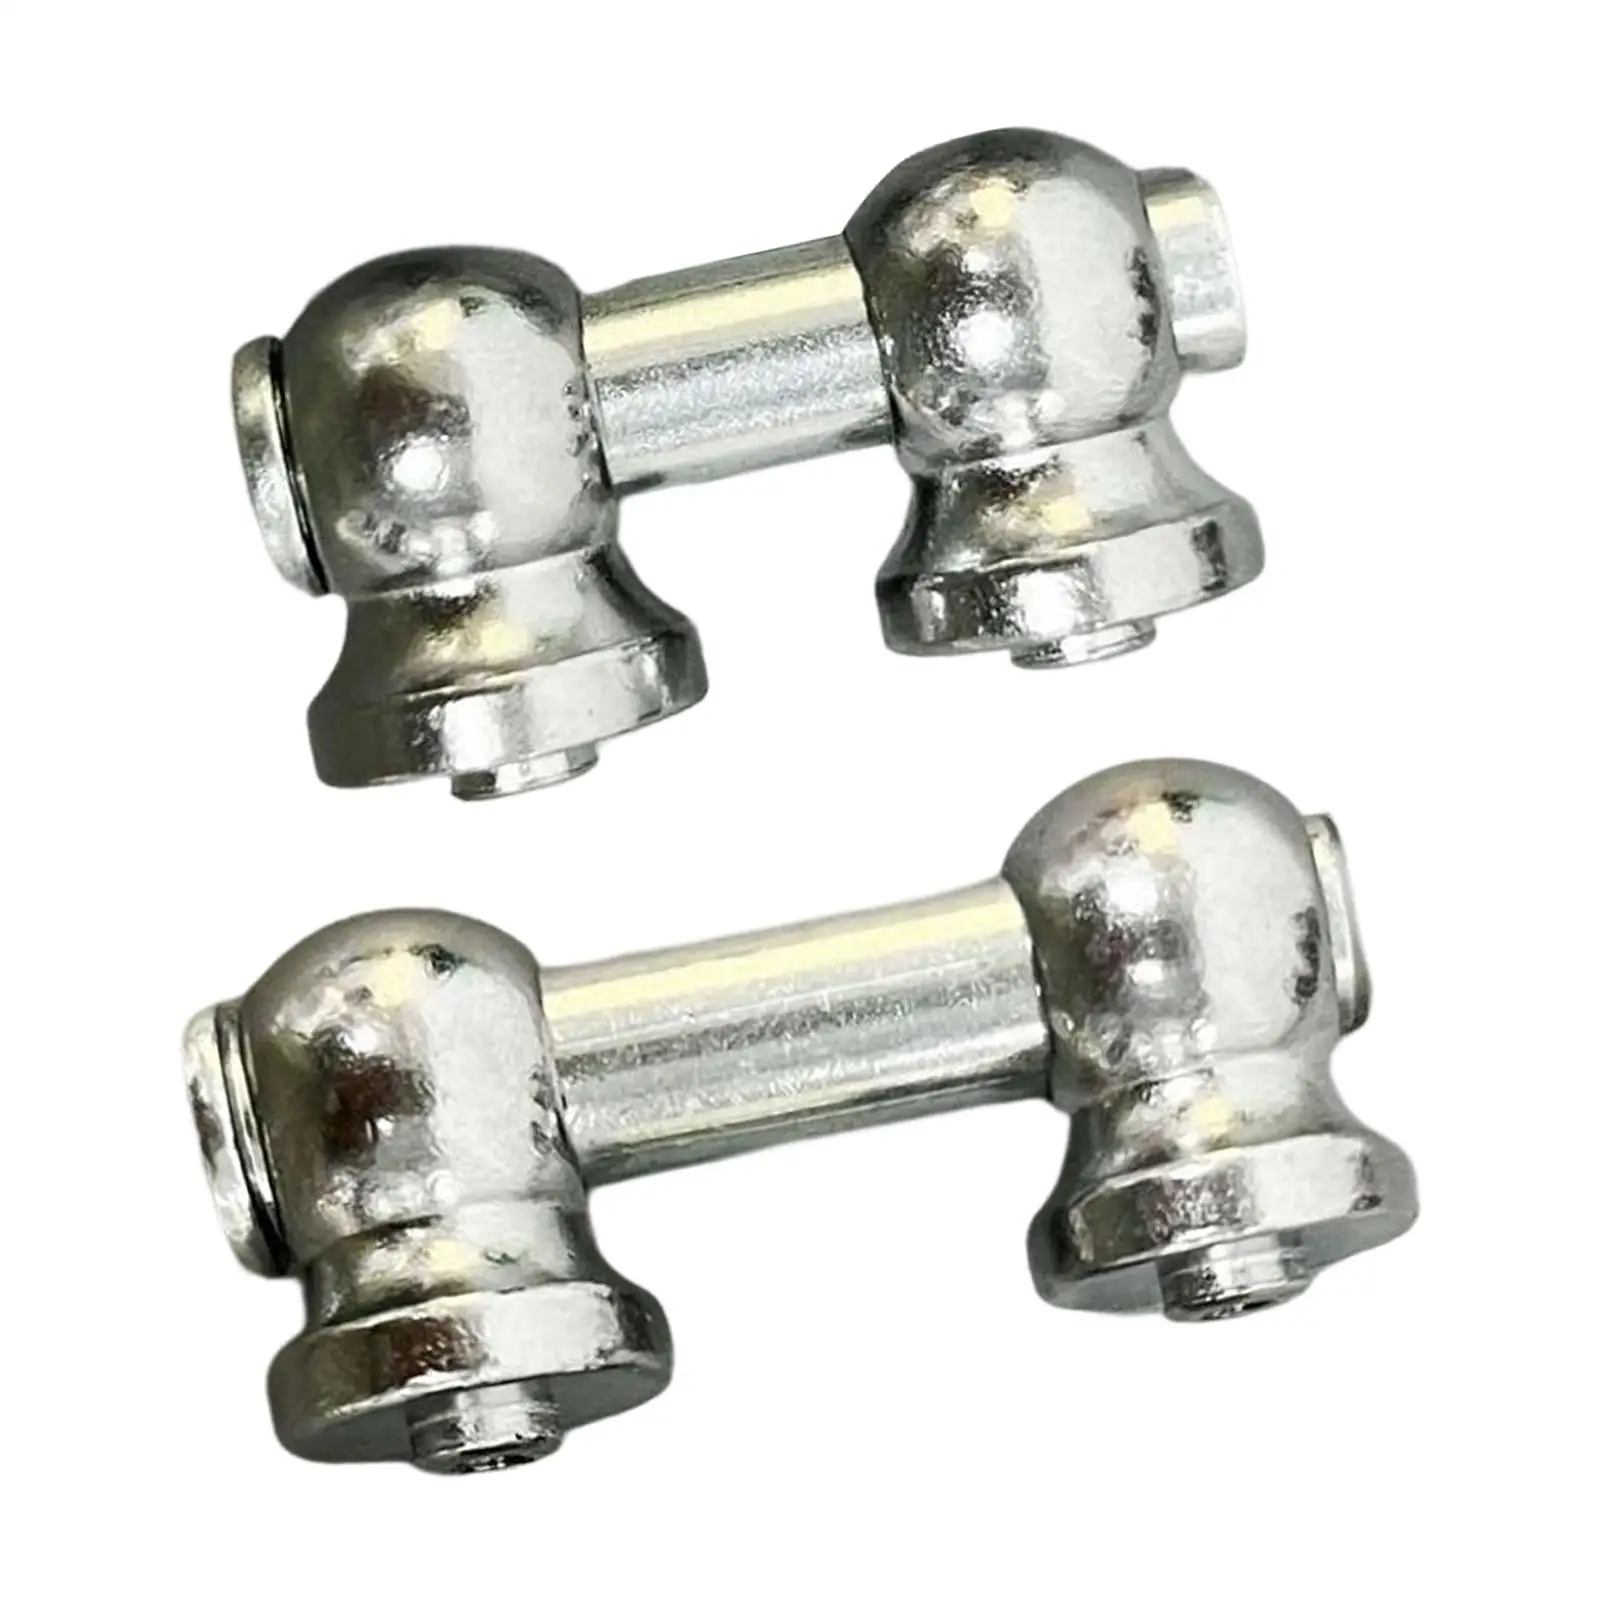 Universal Snare Drum Lug Metal Single Durable Easy to Install Drums Ear for Musical Instrument Snare Replacement Repairing